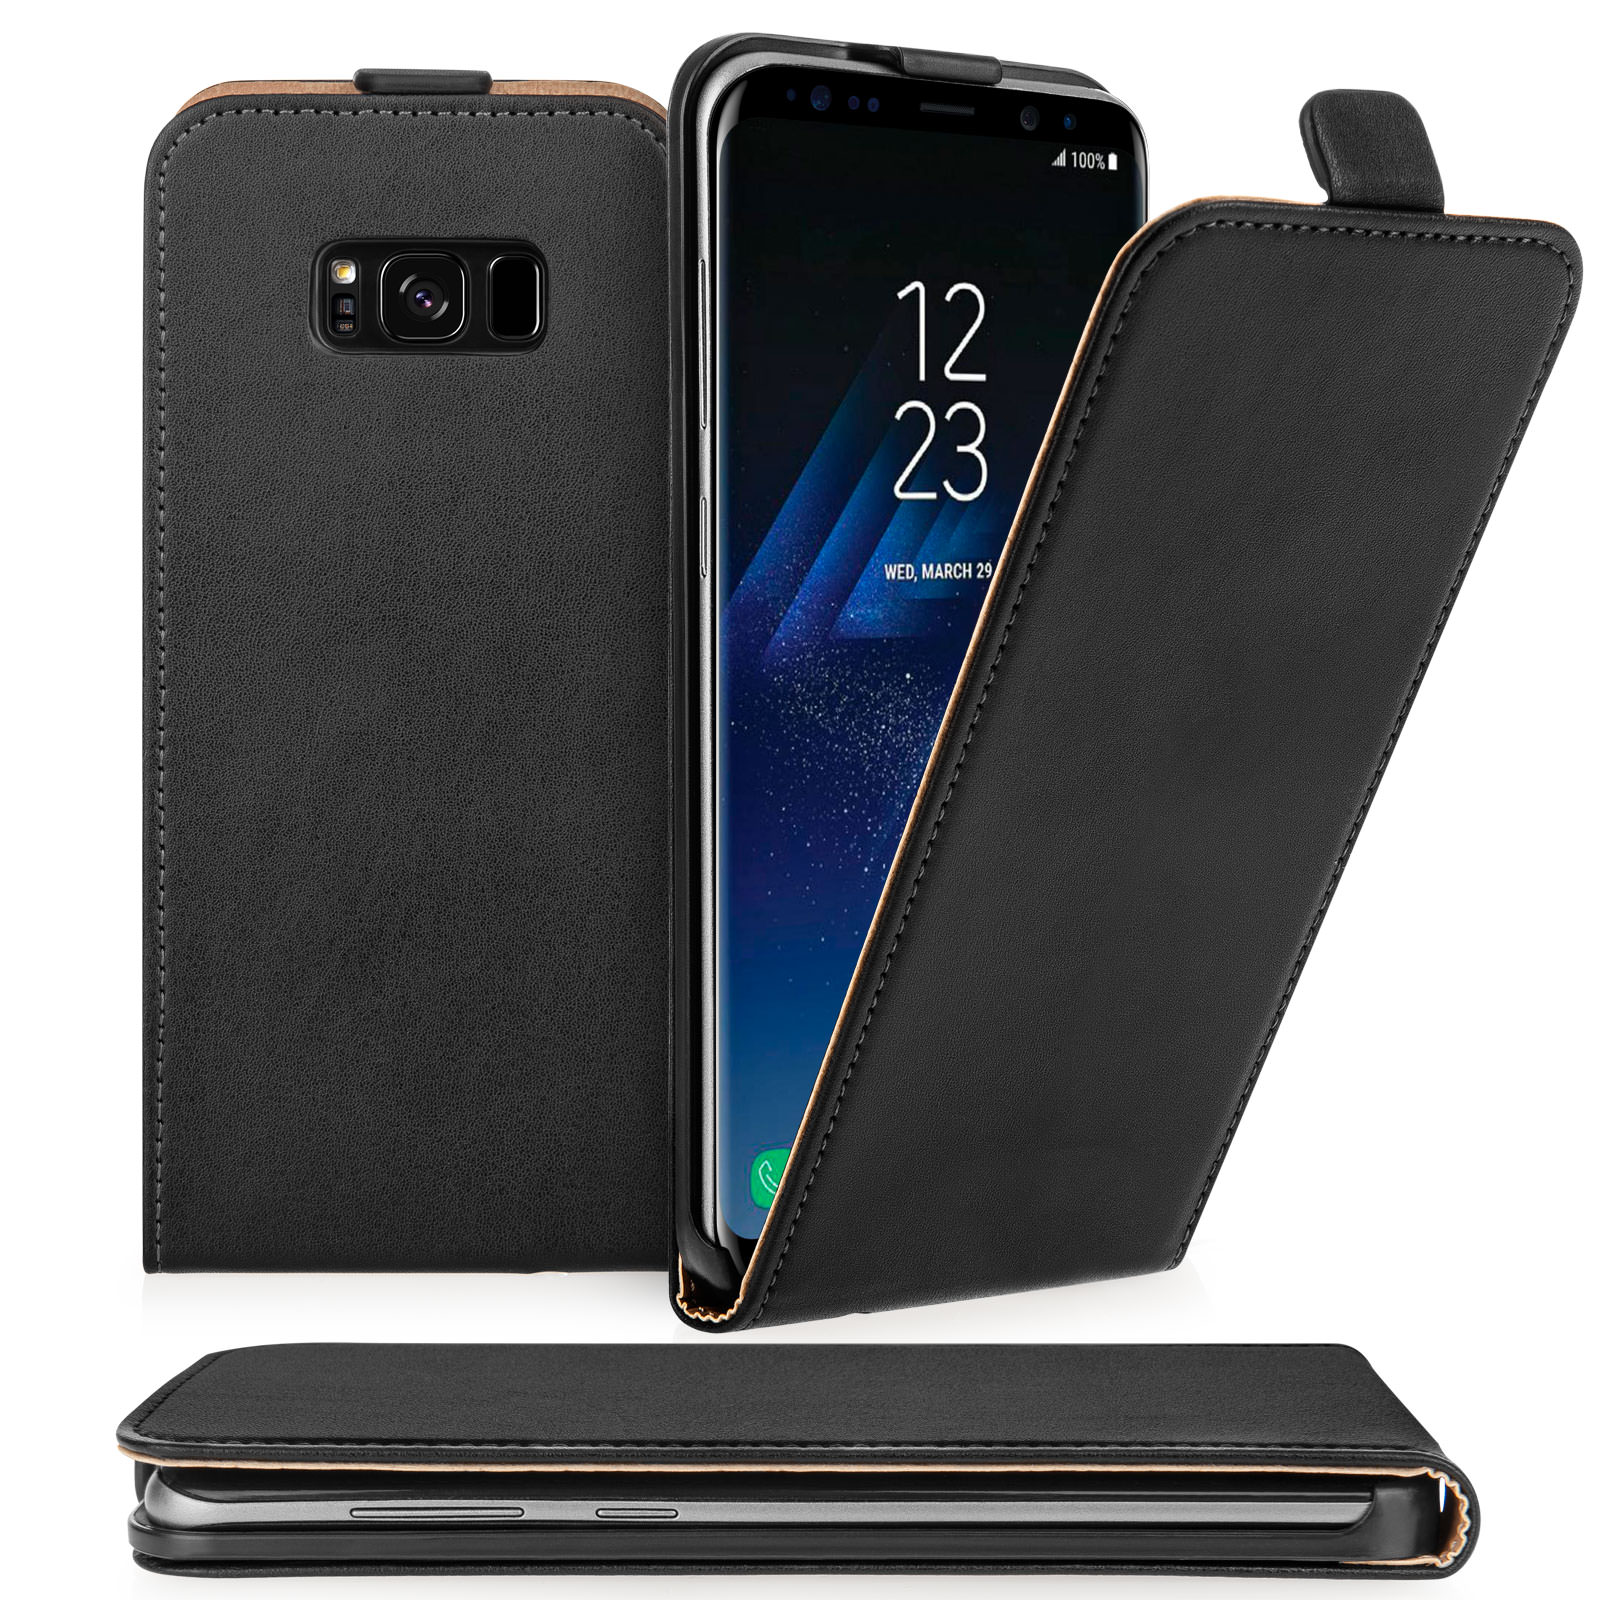 Caseflex Samsung Galaxy S8 Plus Real Leather Flip Case Black At Mobile Madhouse Mobile Phone